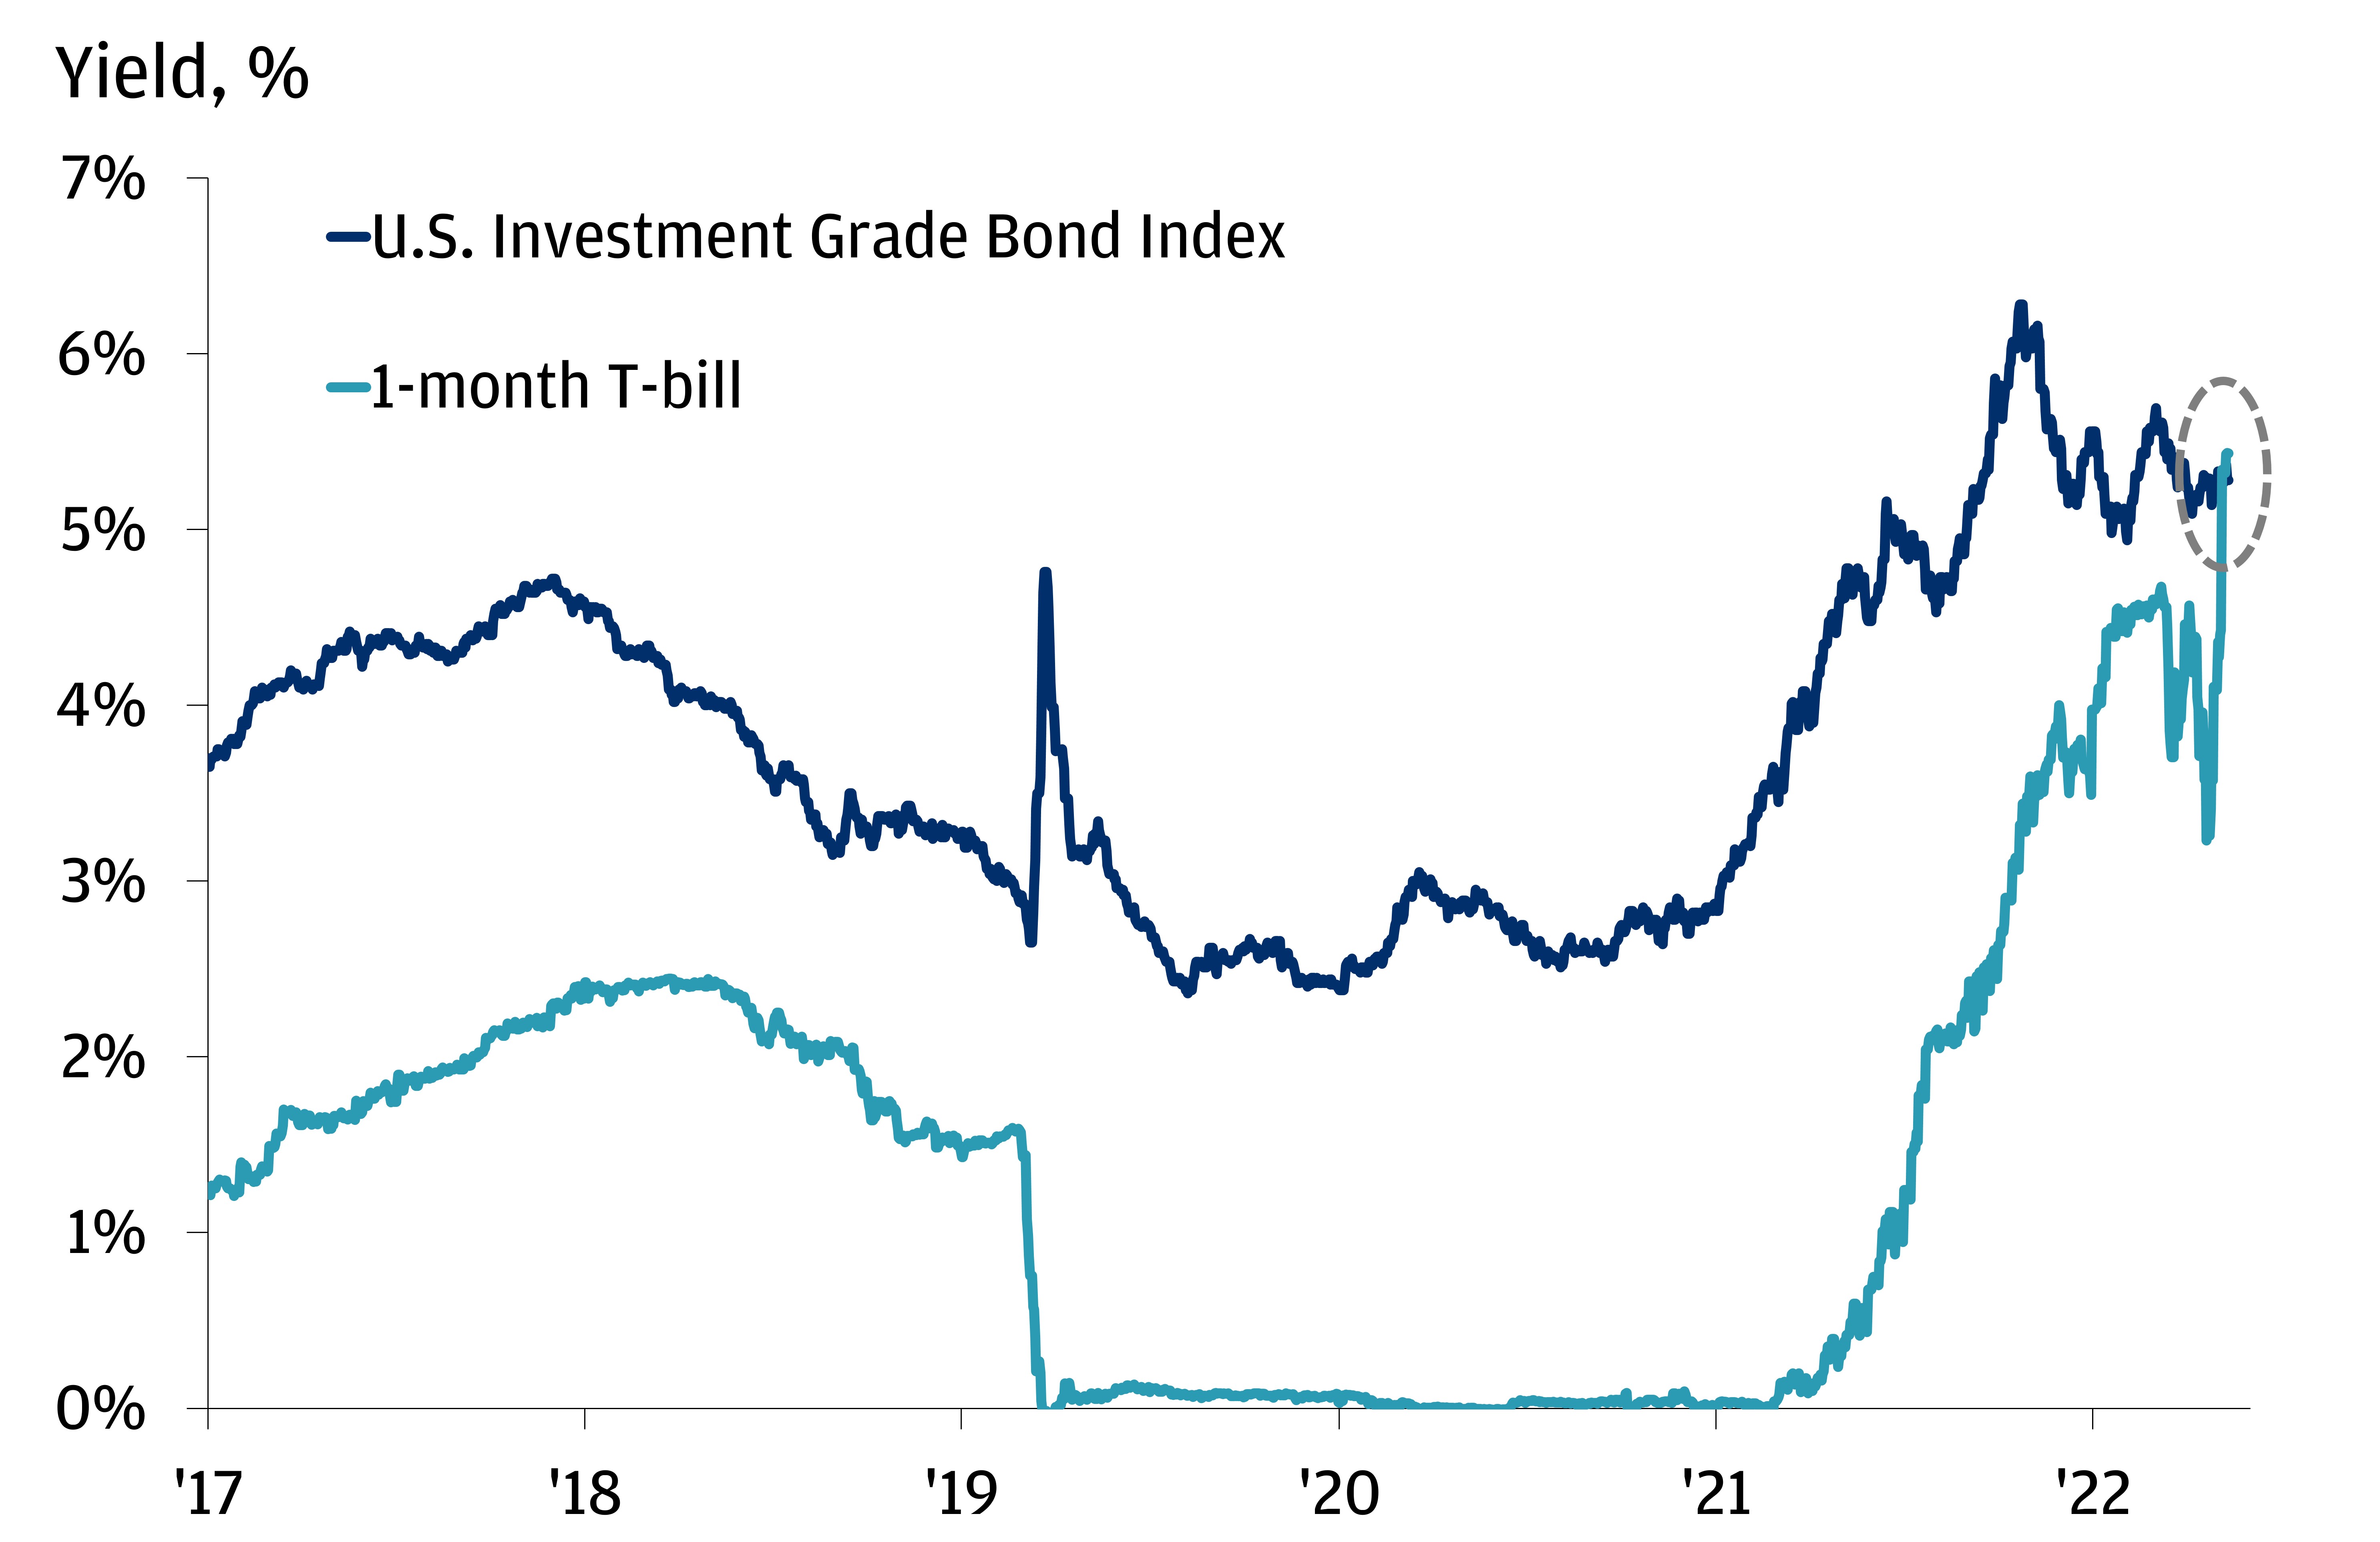 The chart describes the yield of U.S. Investment Grade Bond Index versus 1-month T-bill.